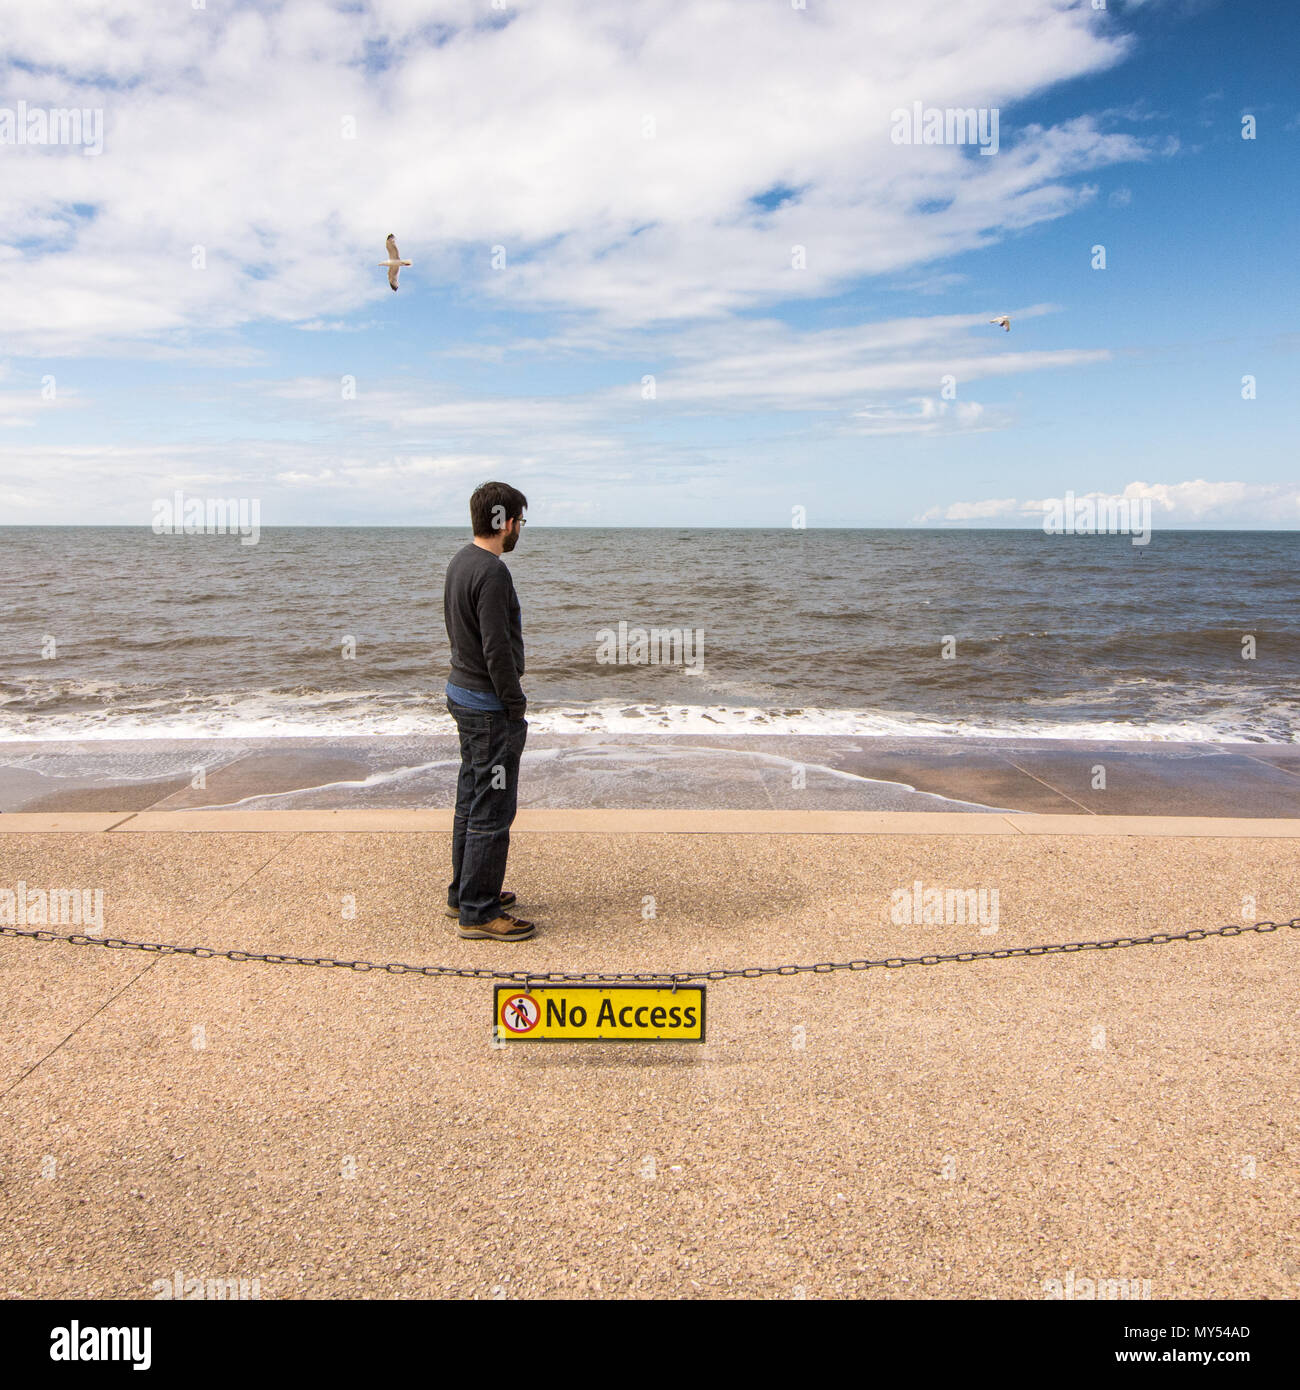 Blackpool, England, UK - August 1, 2015: A man looks at the Blackpool Beach sea defences at high tide, behind a No Access sign, while gulls fly overhe Stock Photo